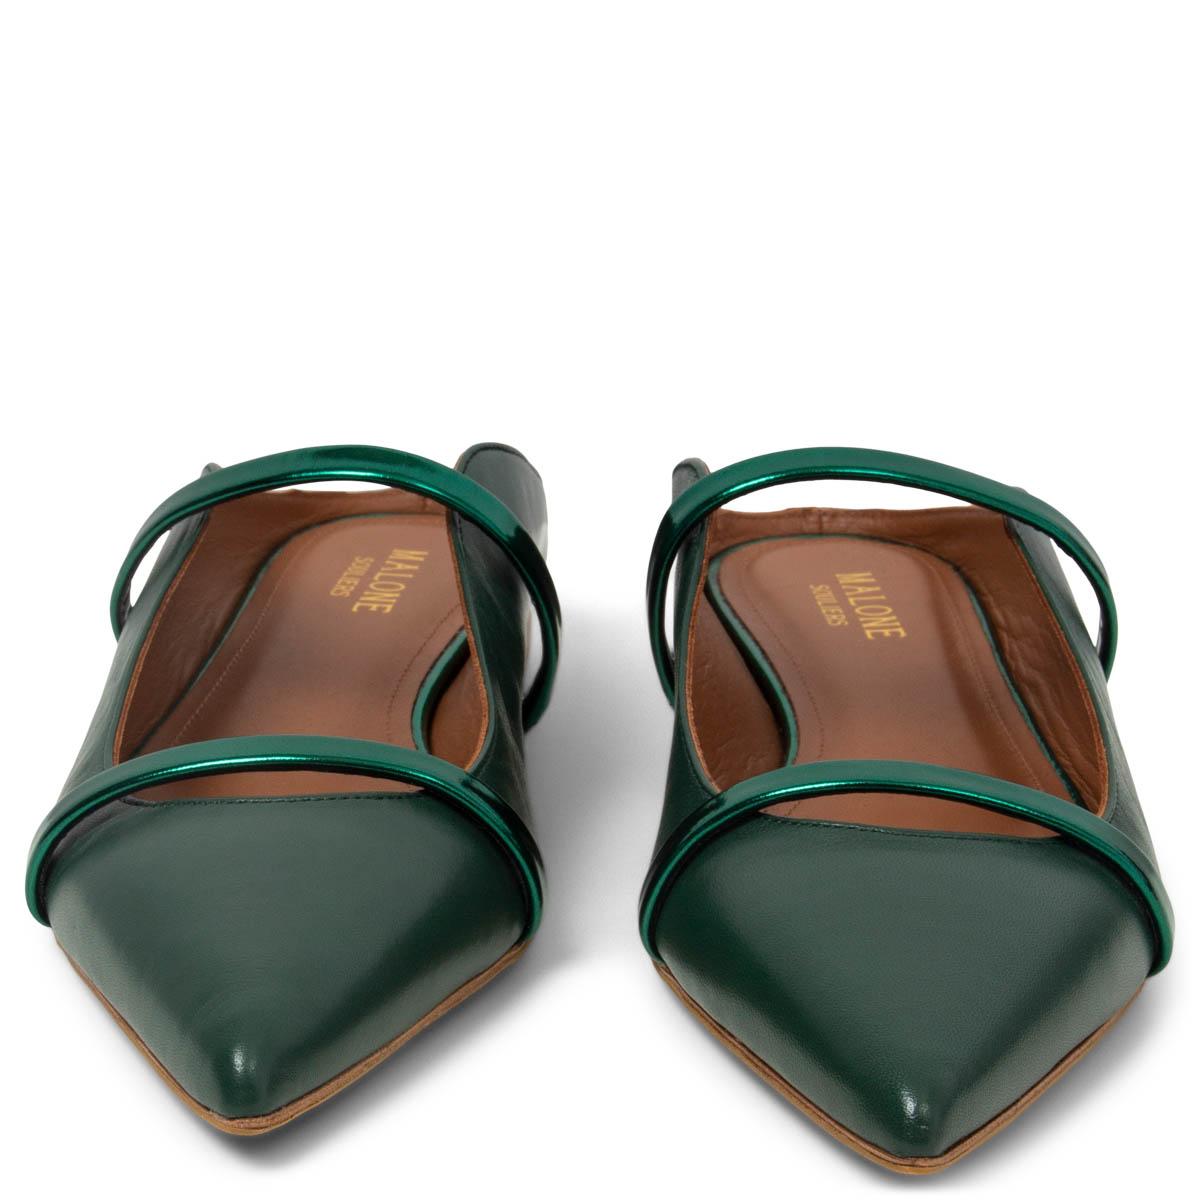 100% authentic Malone Souliers Maureen mules in forest green smooth leather with metallic straps. Brand new. Come with dust bag. Rubber sole got added. 

Measurements
Imprinted Size	38
Shoe Size	38
Inside Sole	24.5cm (9.6in)
Width	7.5cm